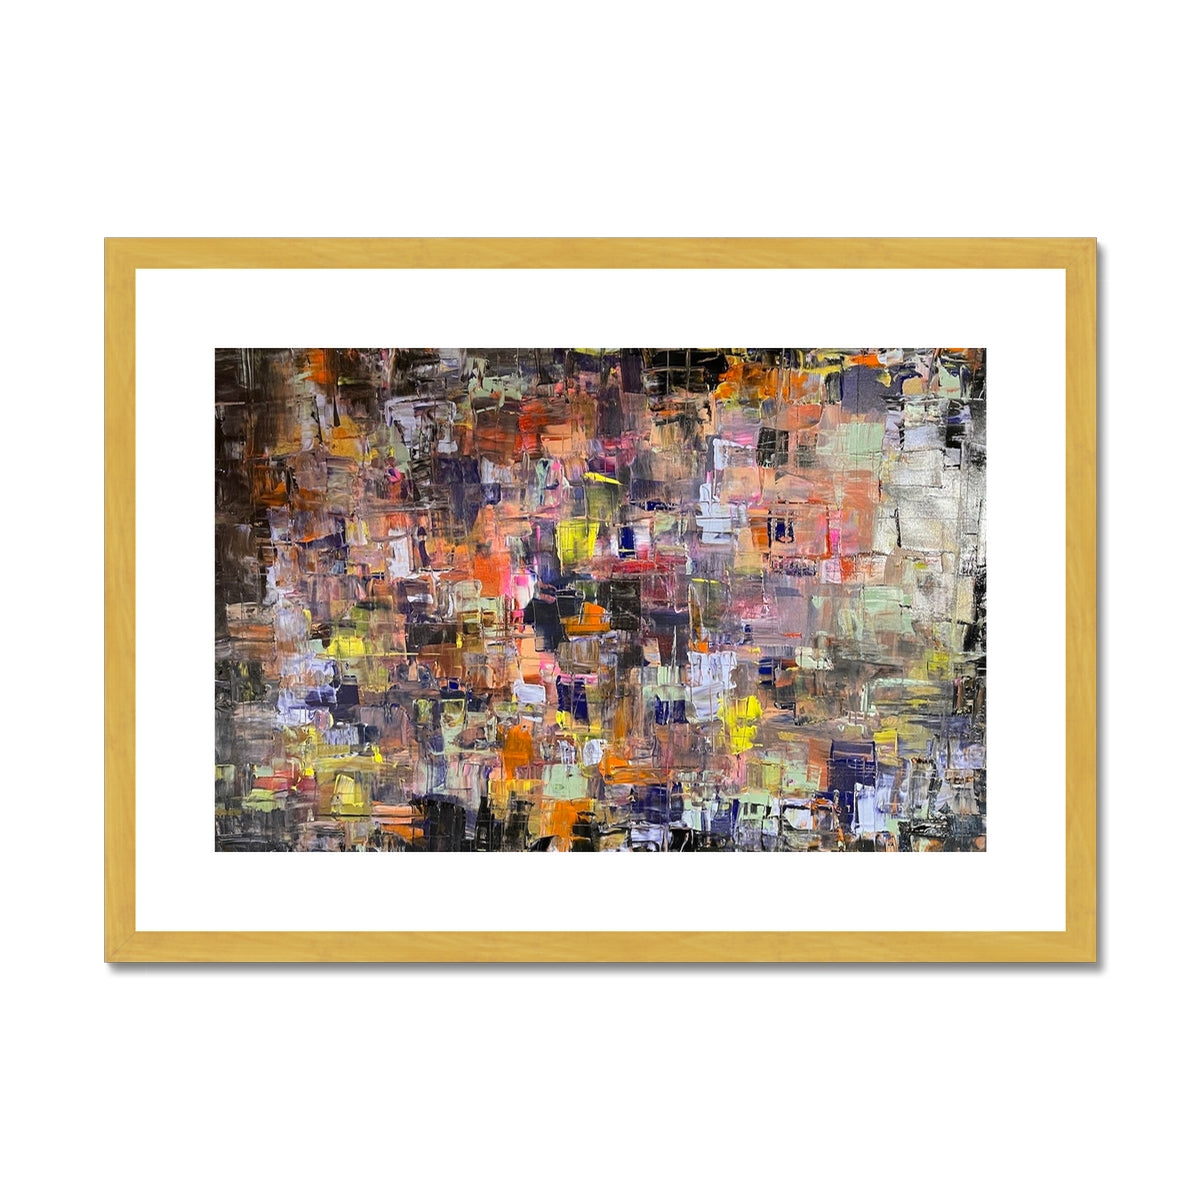 Never Enough Abstract Painting | Antique Framed & Mounted Prints From Scotland-Antique Framed & Mounted Prints-Abstract & Impressionistic Art Gallery-A2 Landscape-Gold Frame-Paintings, Prints, Homeware, Art Gifts From Scotland By Scottish Artist Kevin Hunter